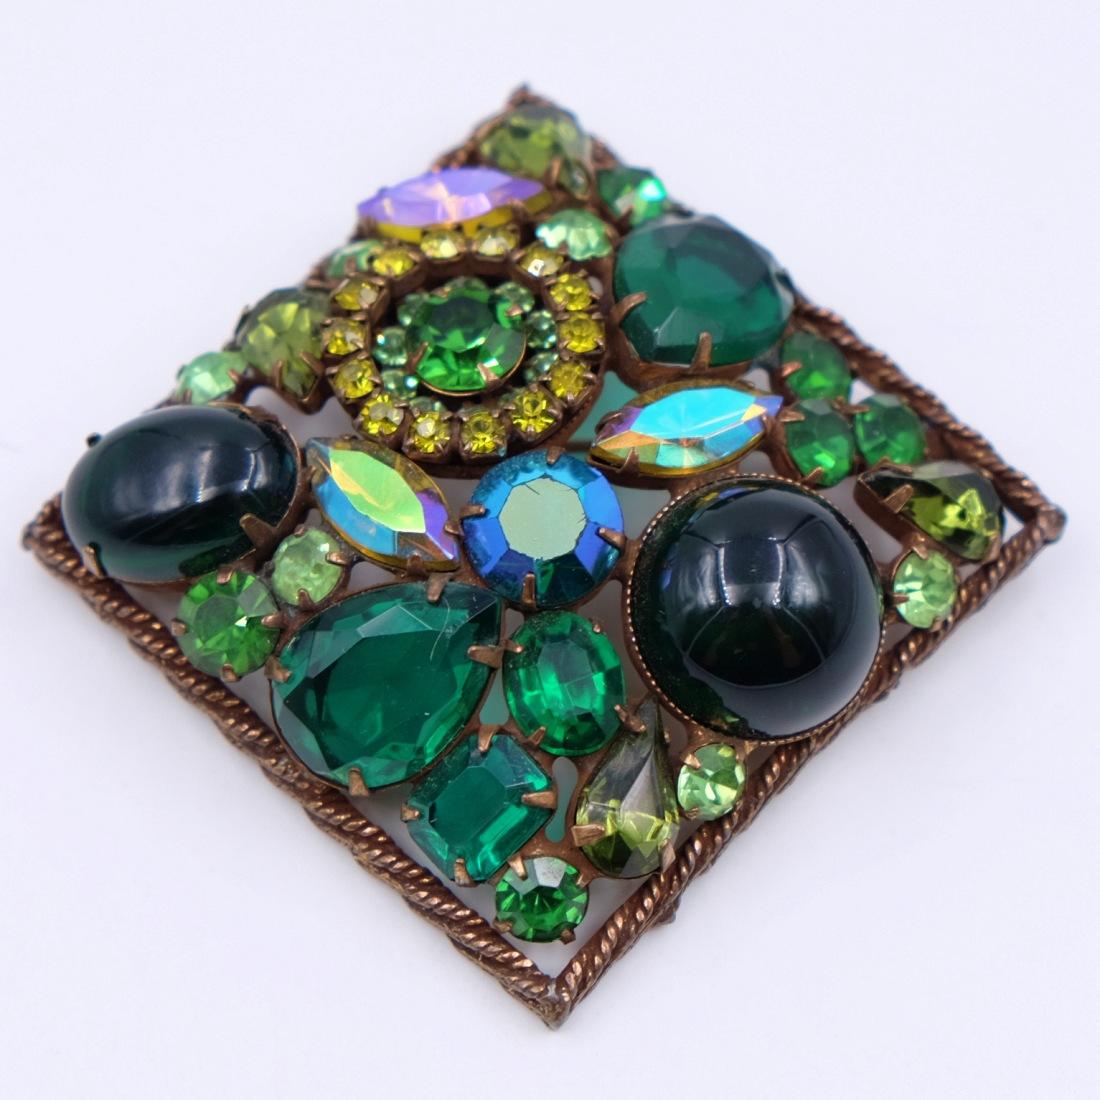 Contemporary high-quality square Weiss brooch attracts with its variety of green shades and shapes rhinestones. Weiss is a very well-known company for is high standards of craftsmanship.
Materials: Base metal, rhinestones
Height: 2.36 Inch
Hallmark: